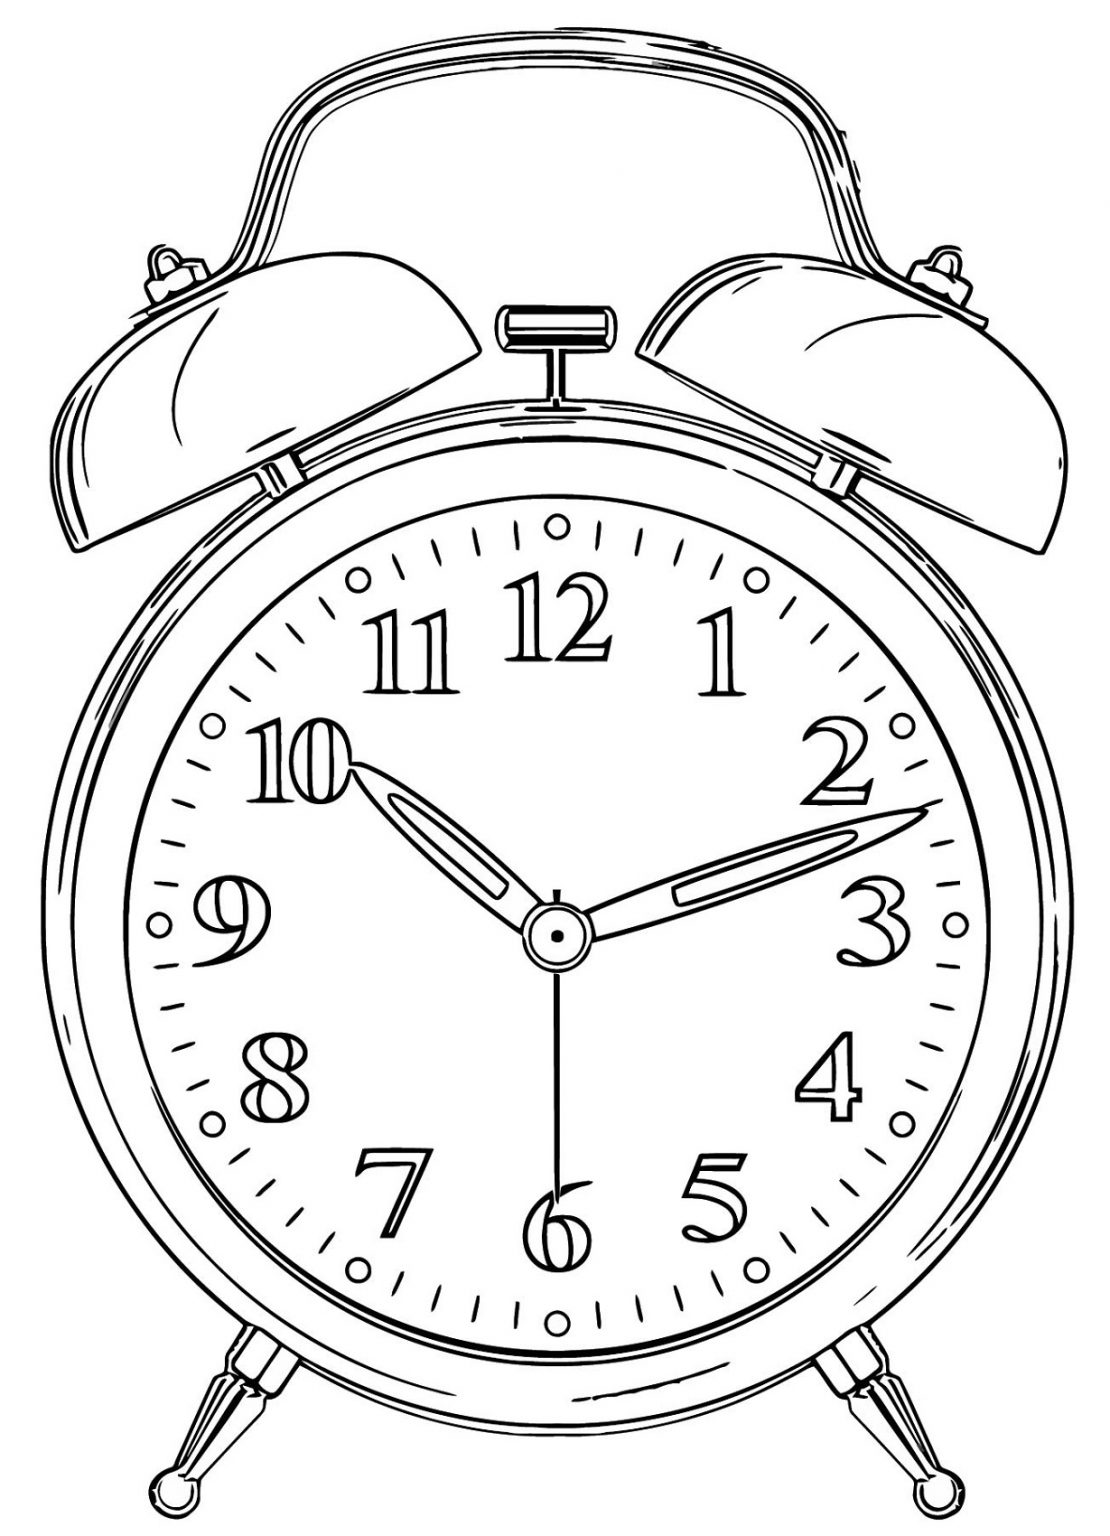 worksheets-for-clock-face-templates-printable